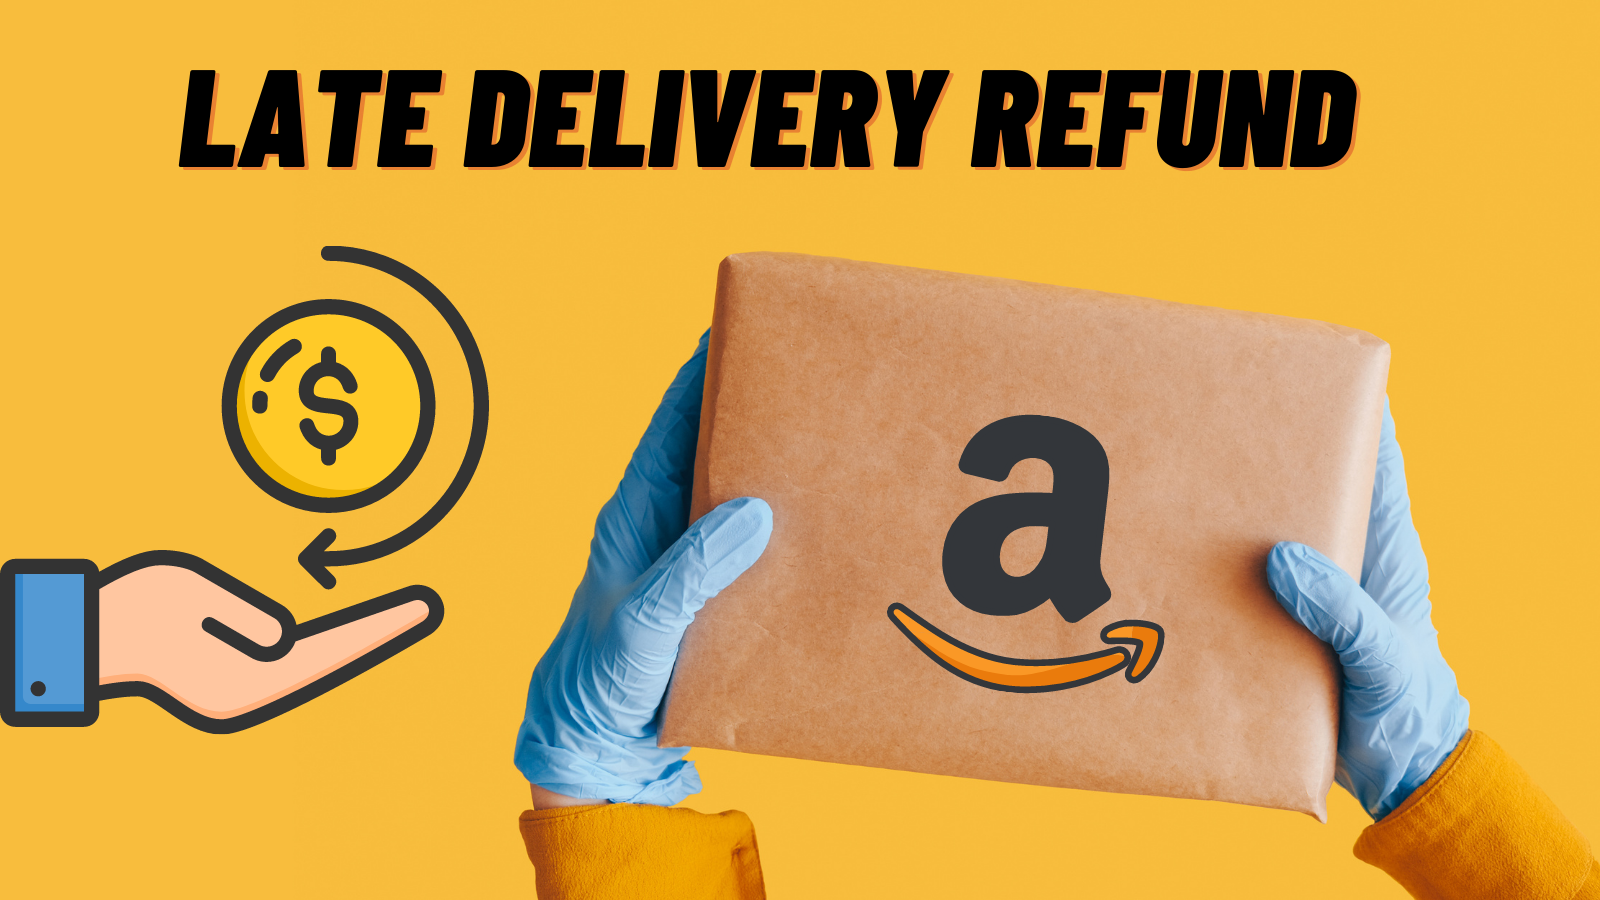 Amazon Late Delivery Refund in 2022